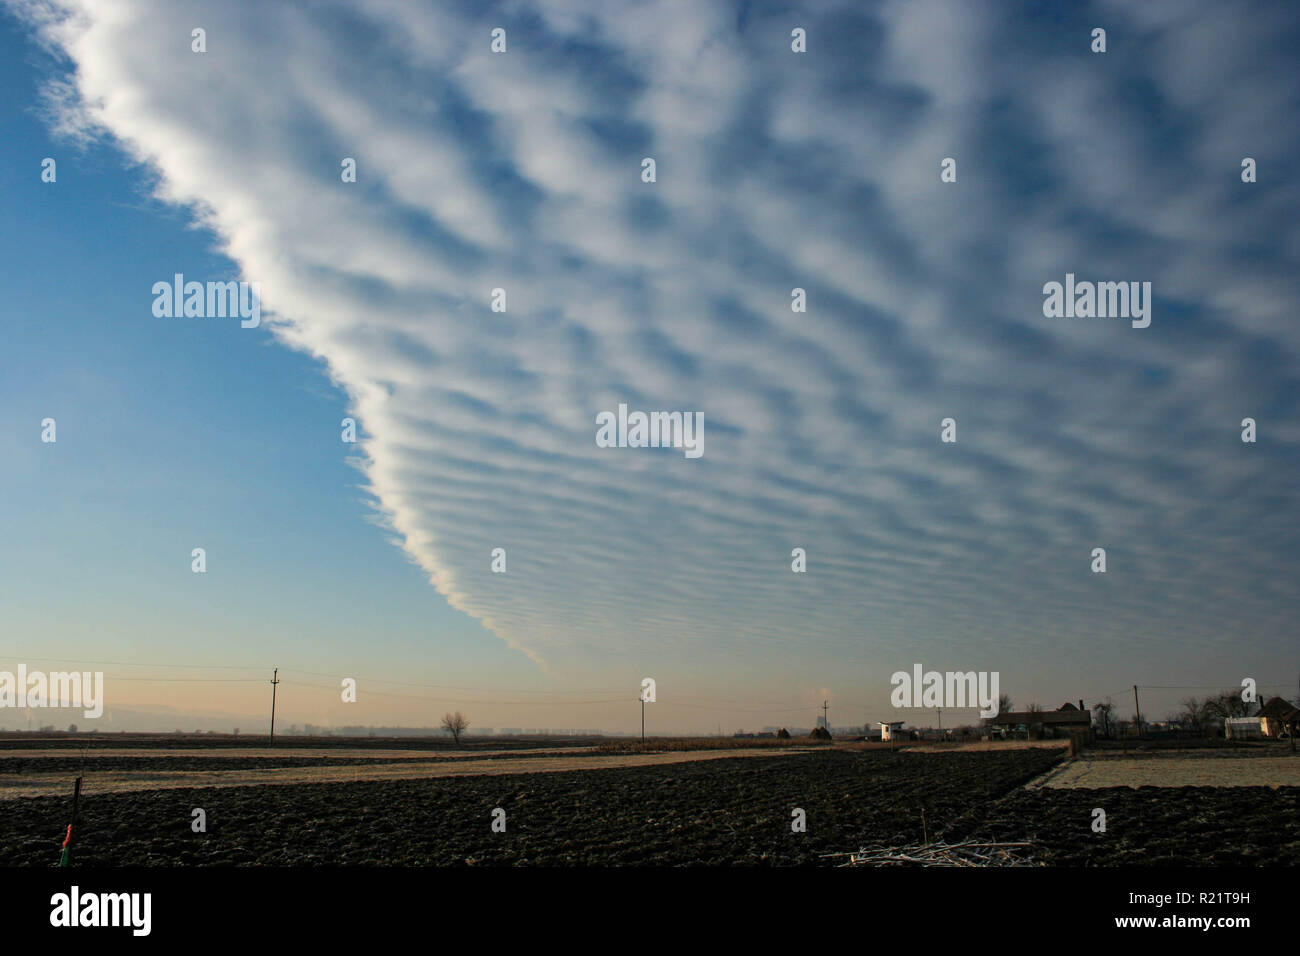 A field of altocumulus clouds with a sharp edge is invading the sky over Transylvania, Romania. Indicative of an approaching weather front. Stock Photo